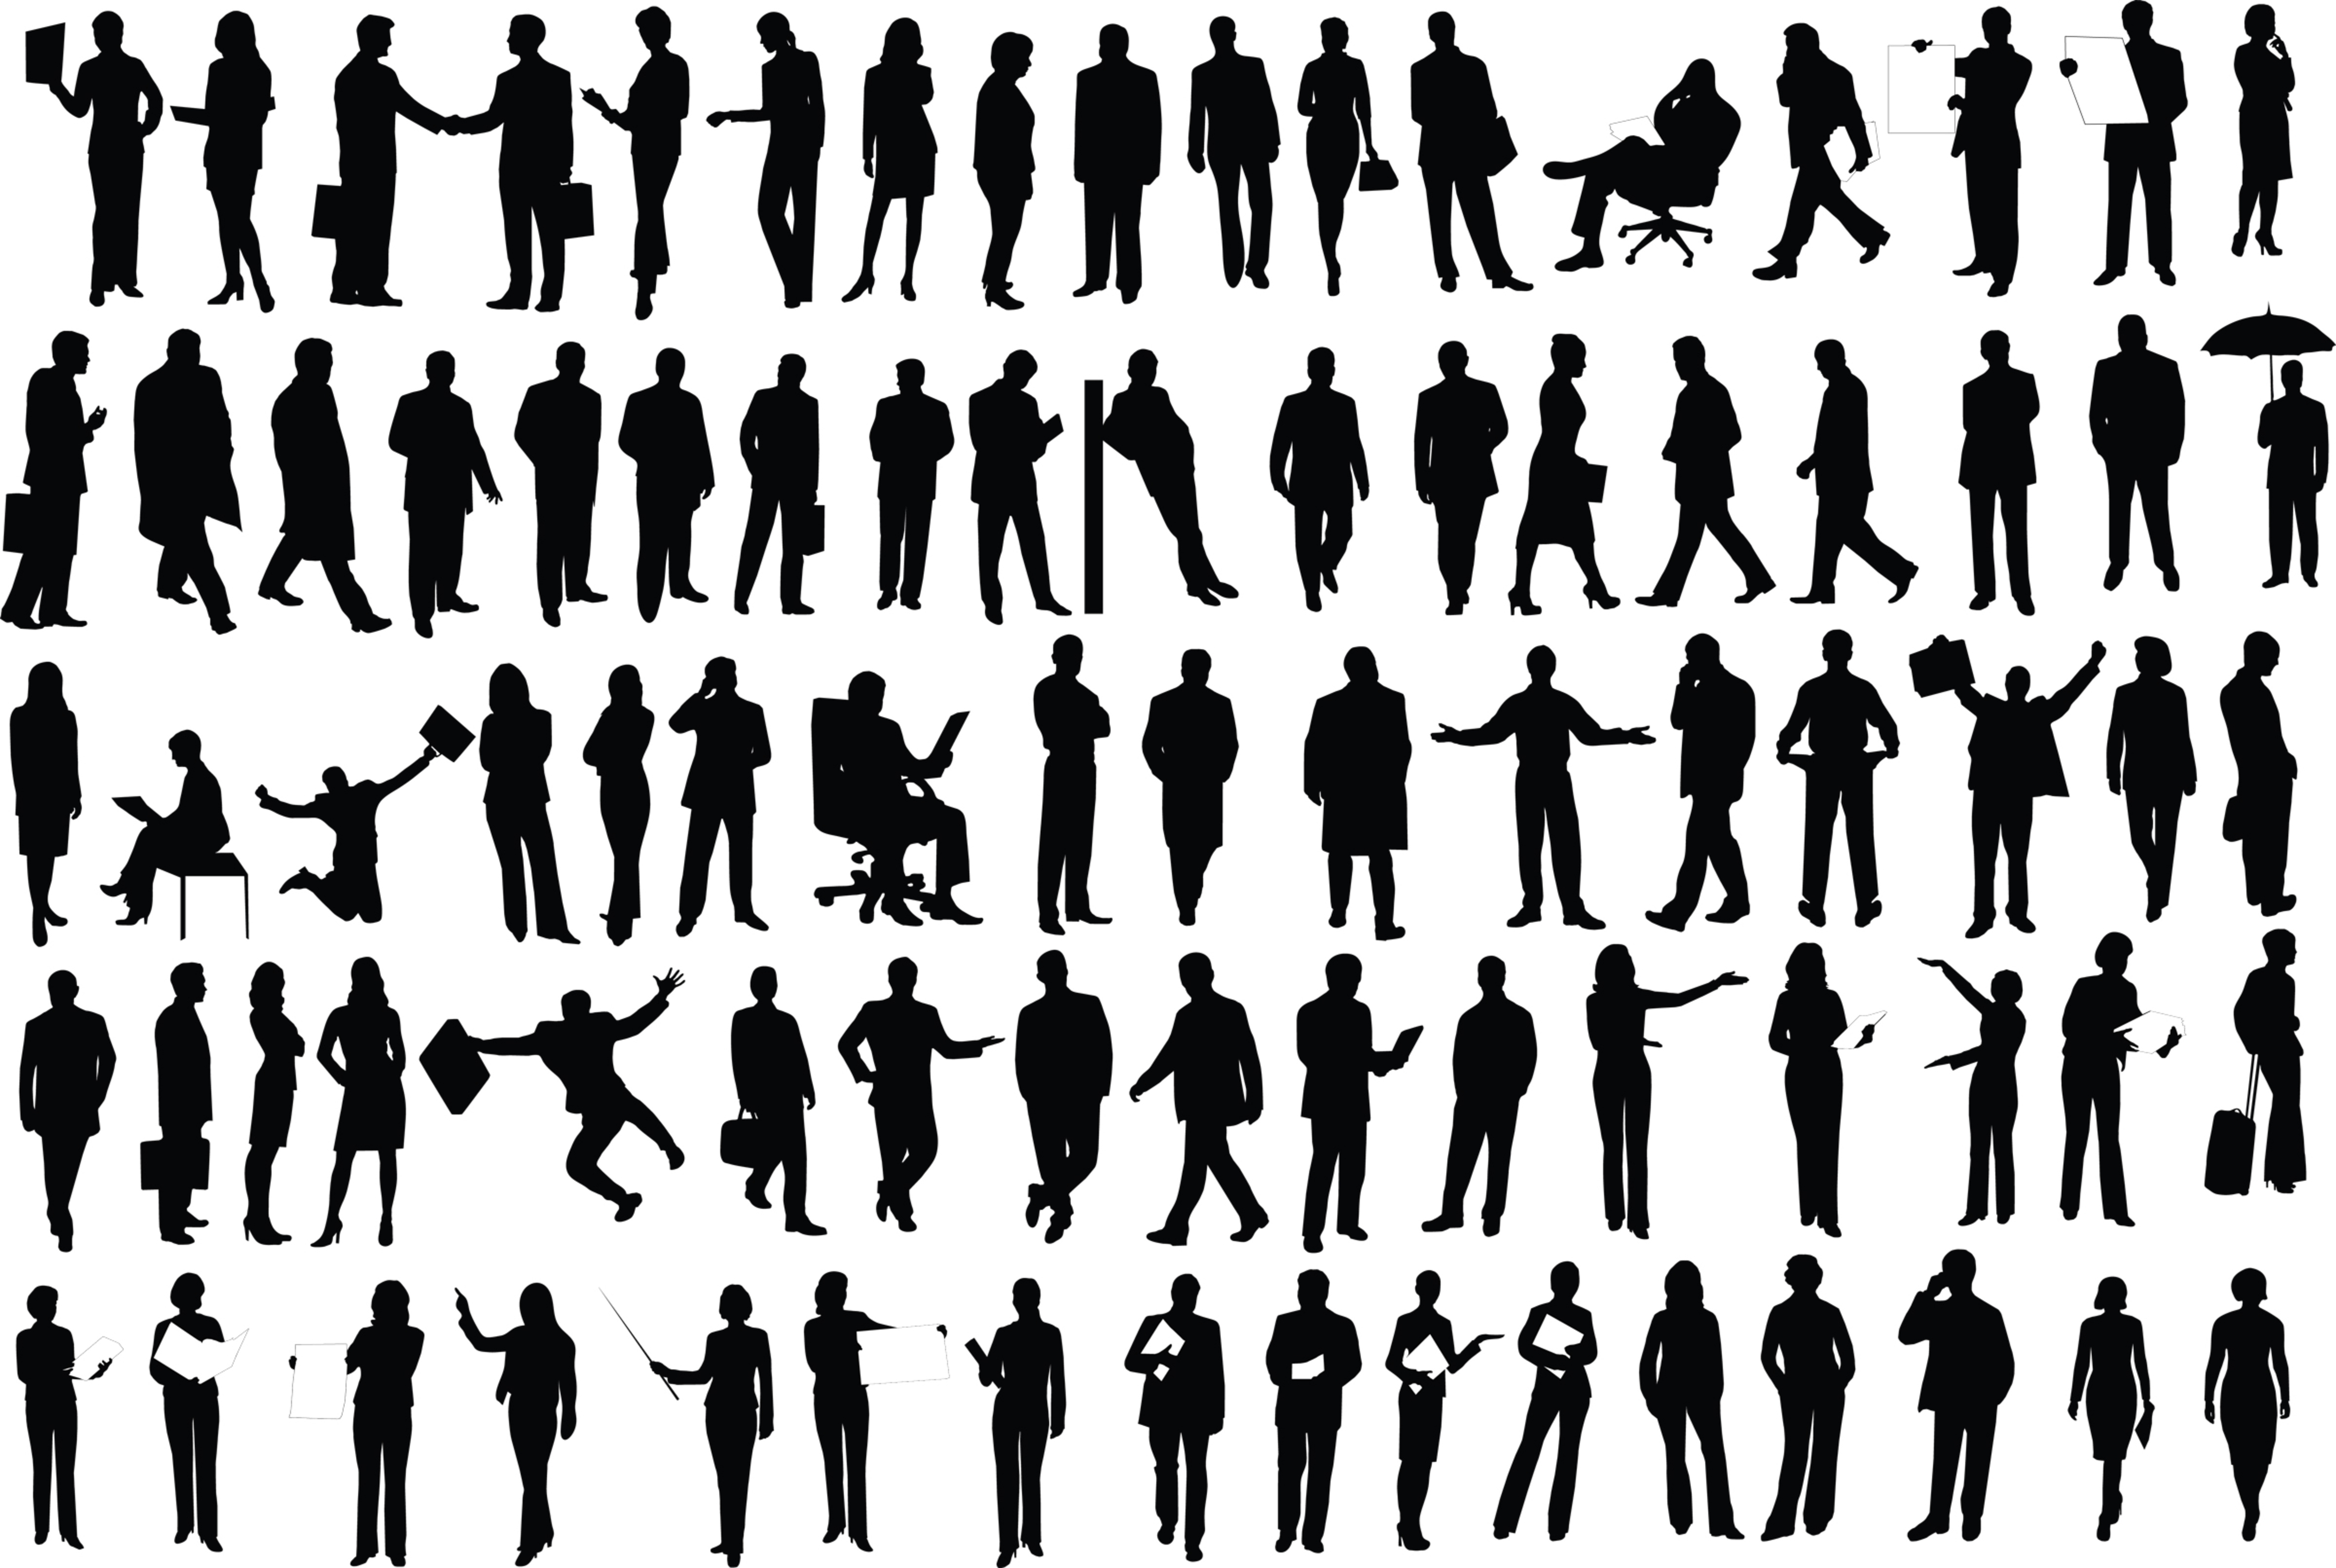 Group Of Business People Silhouette 52138 | ZWALLPIX